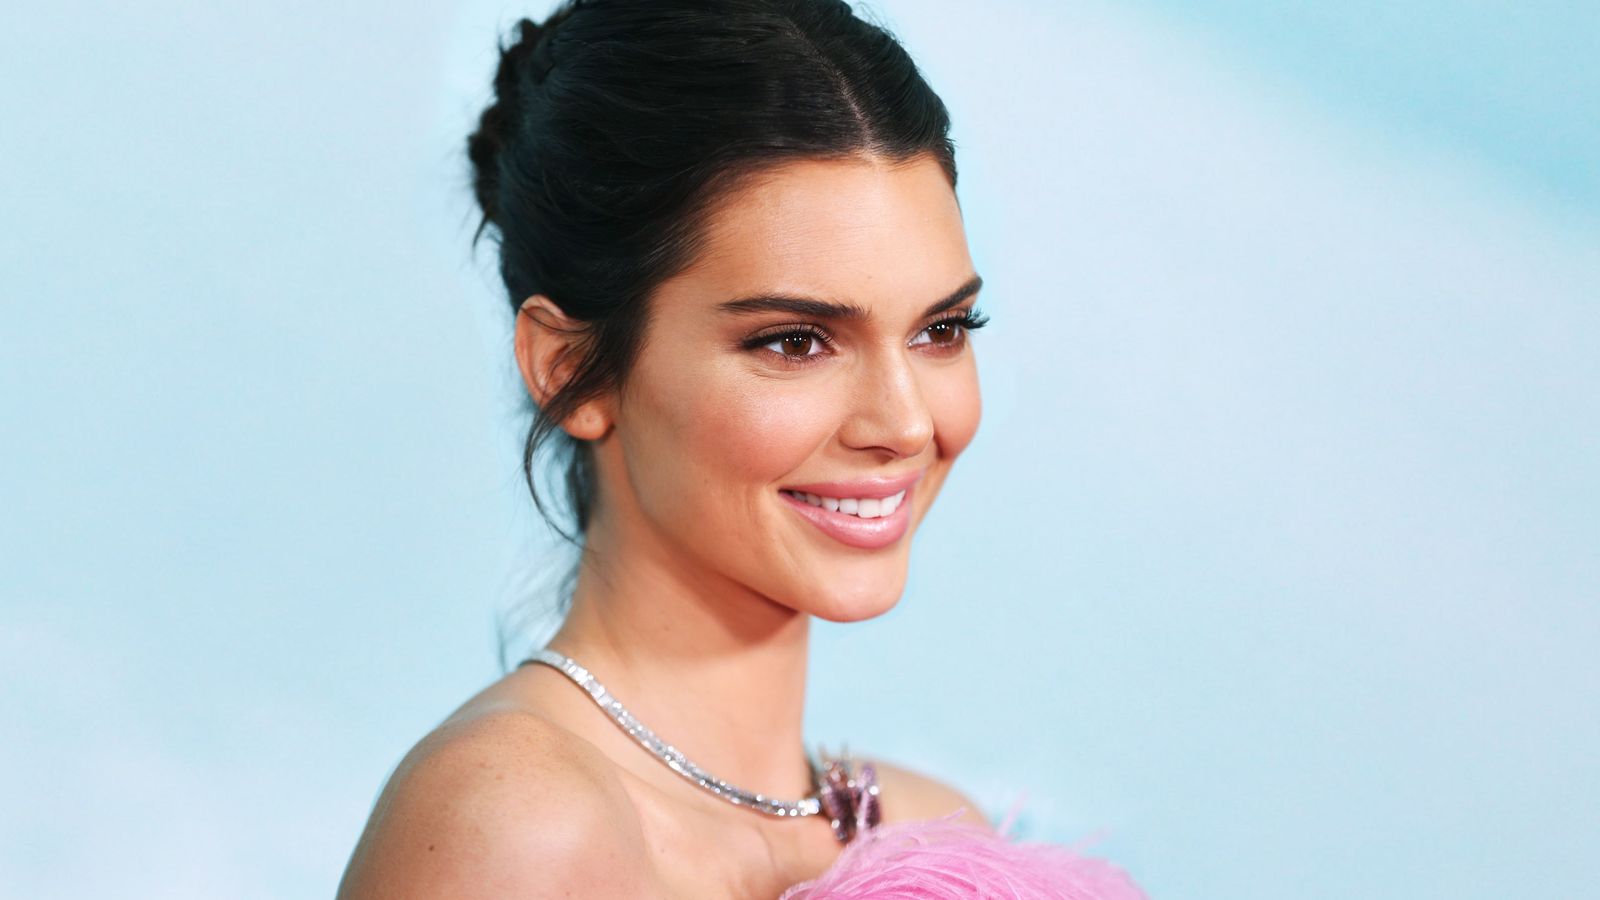 Kendall Jenner Shared With Me Her Teeth Whitening Tips and 2019 Vibe ...